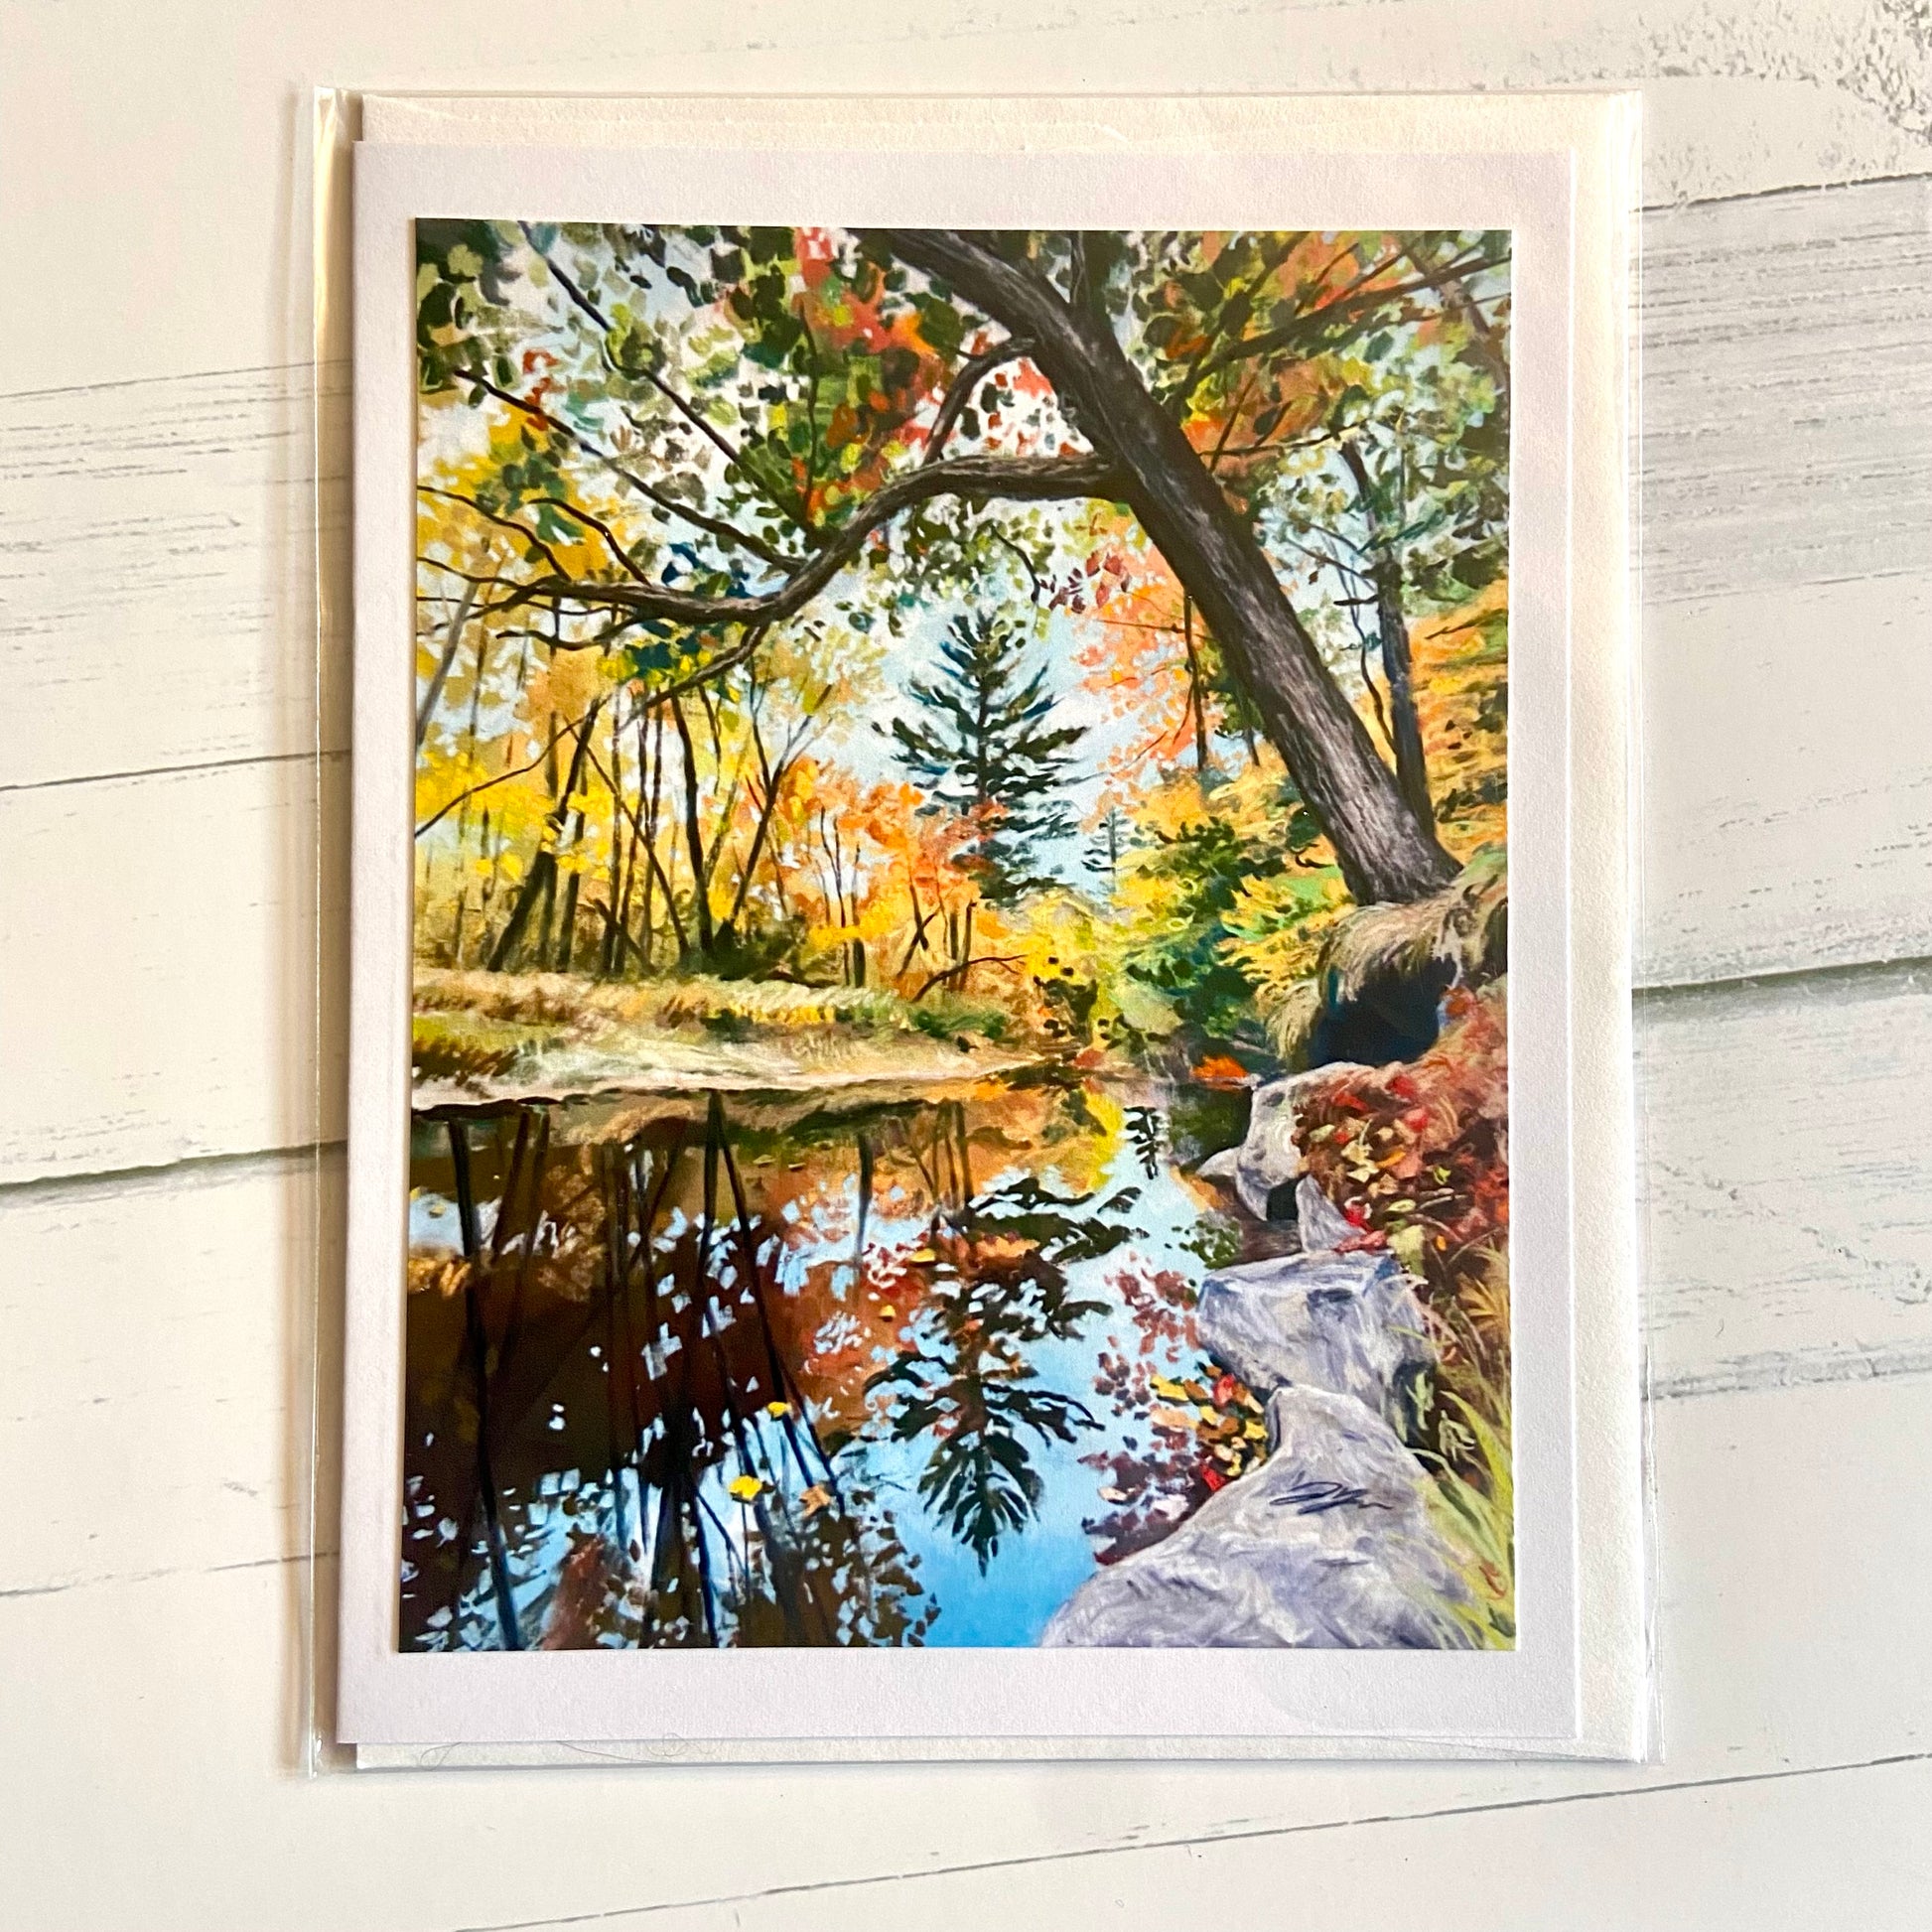 A folded white greeting card with an image of my soft pastel landscape painting, Blackwater. Shown is the mirrorlike Blackwater River of rural New Hampshire, with fall colors in the surrounding trees and one tree in the foreground leaning gracefully over the water.